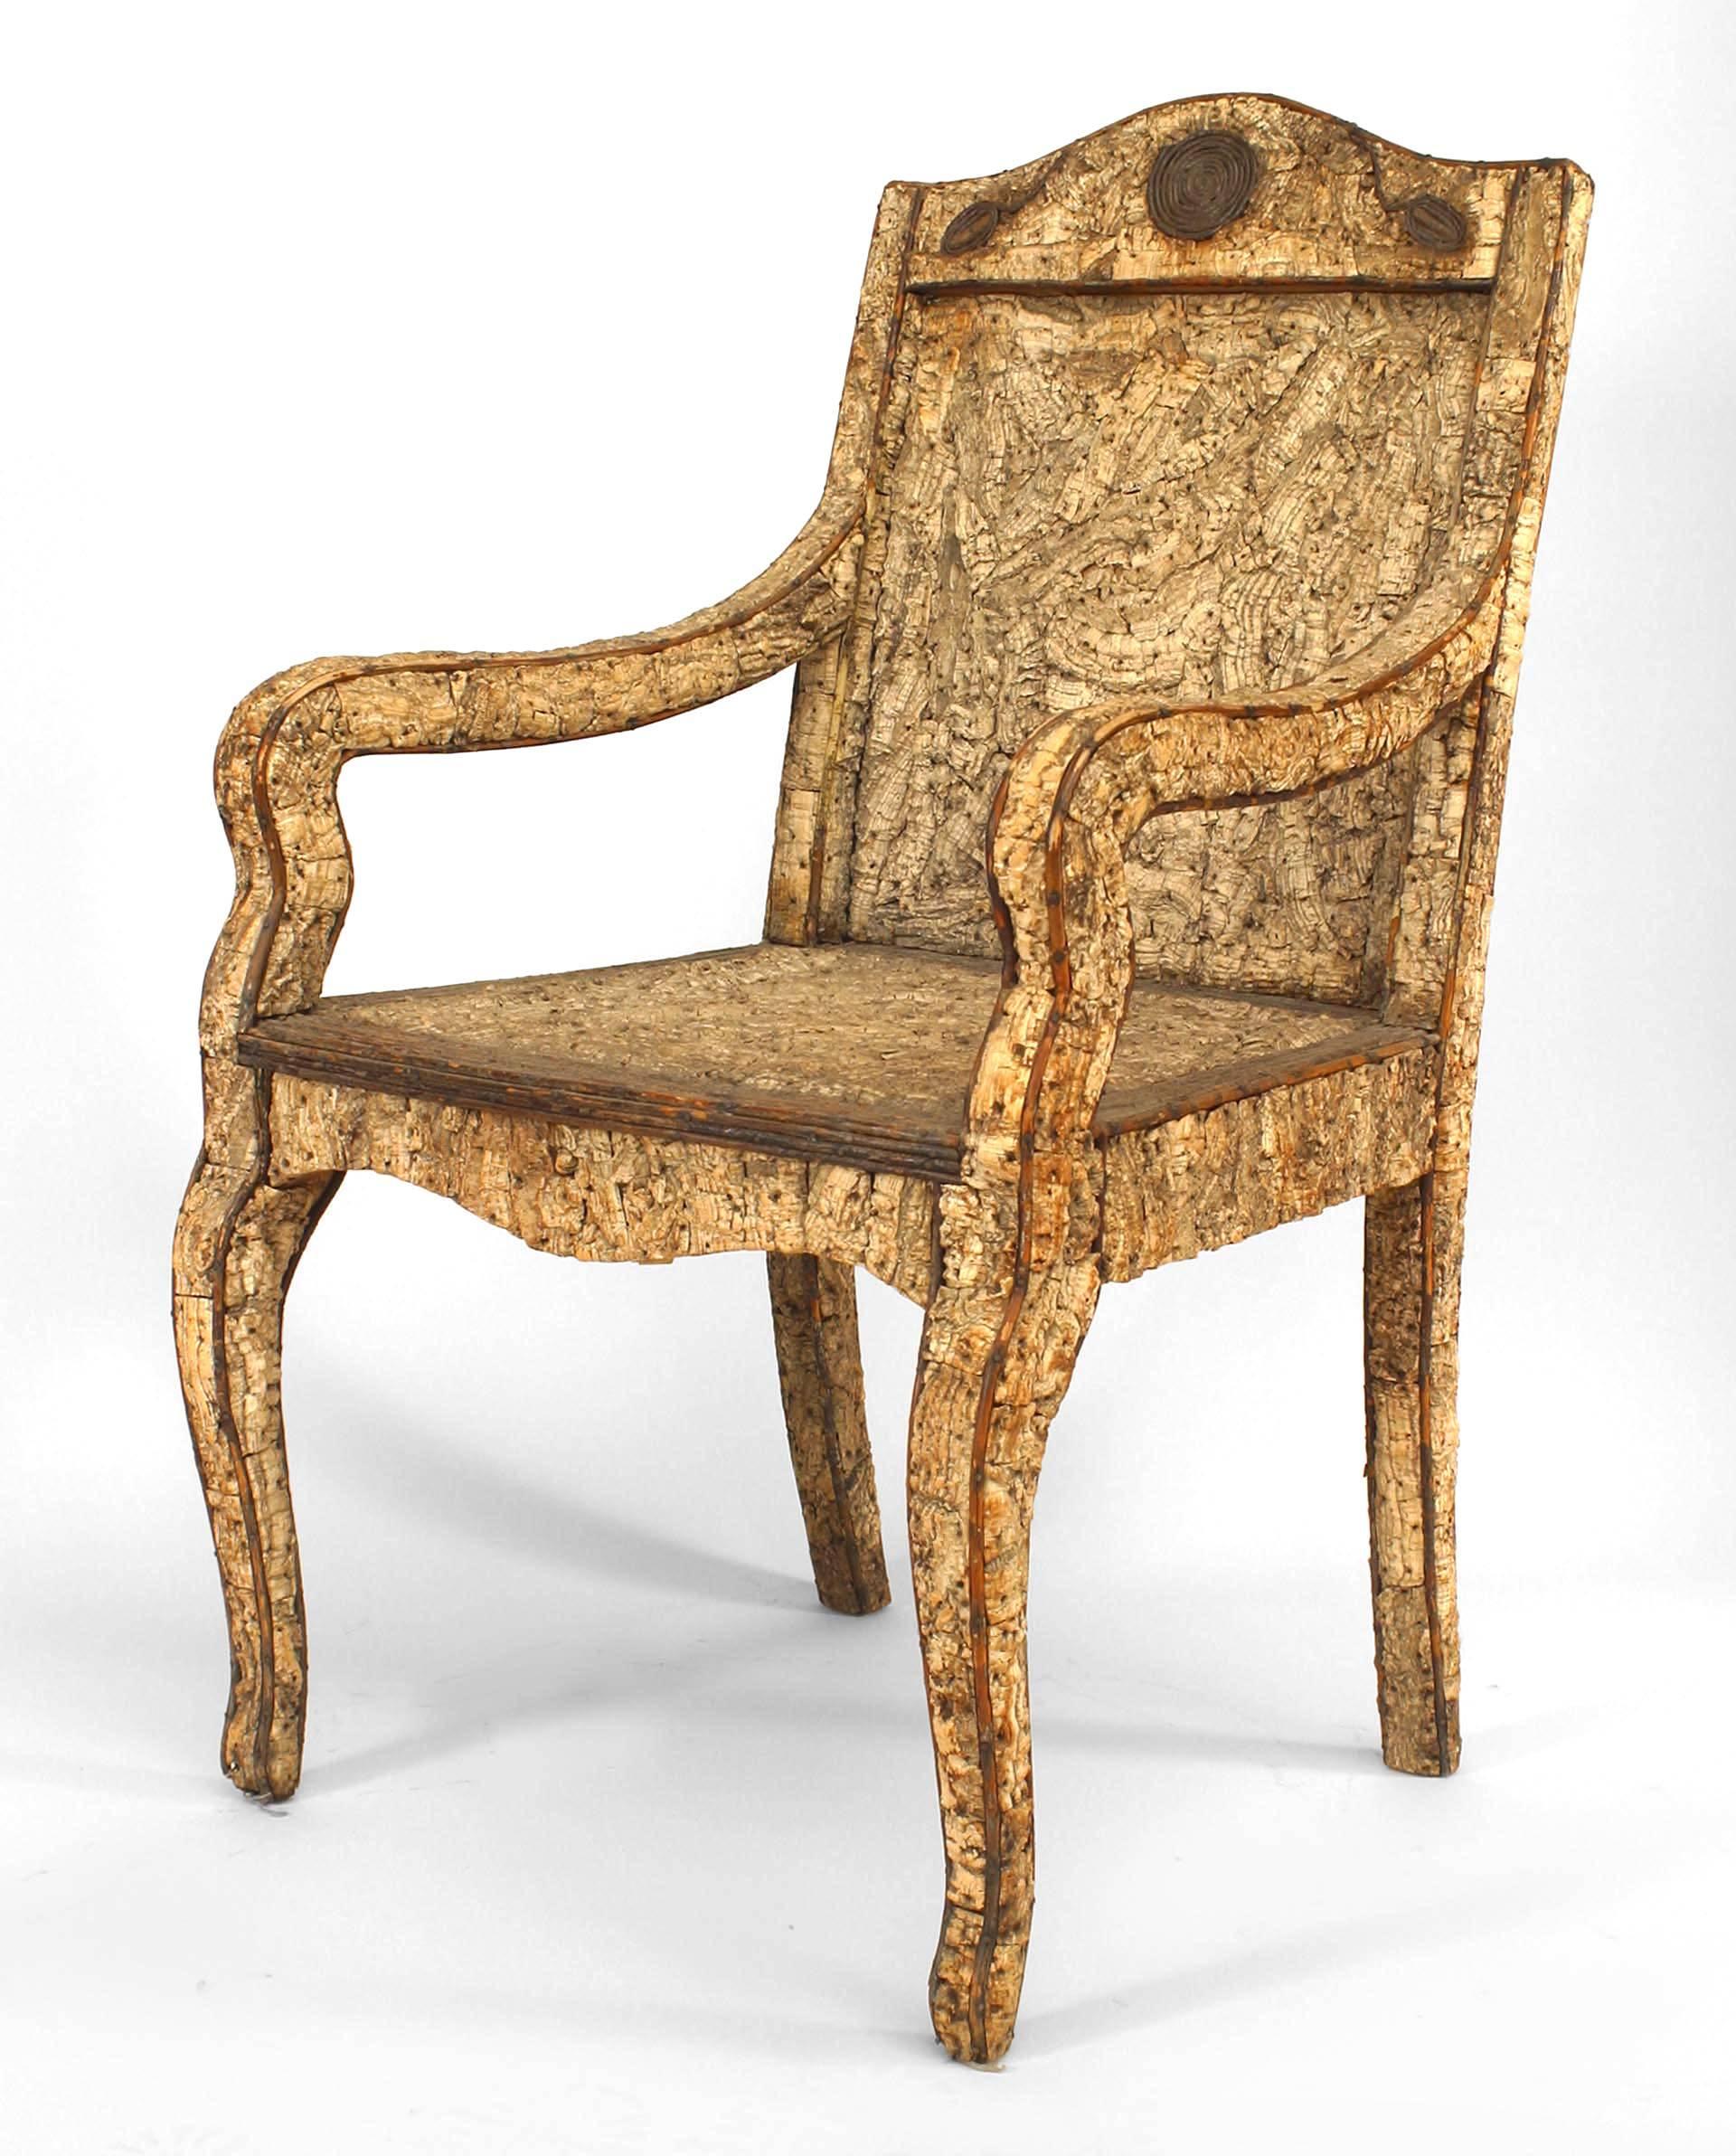 Rustic Continental Neoclassic style cork & twig arm chair. (Scandinavian, late 19th/20th Cent)
